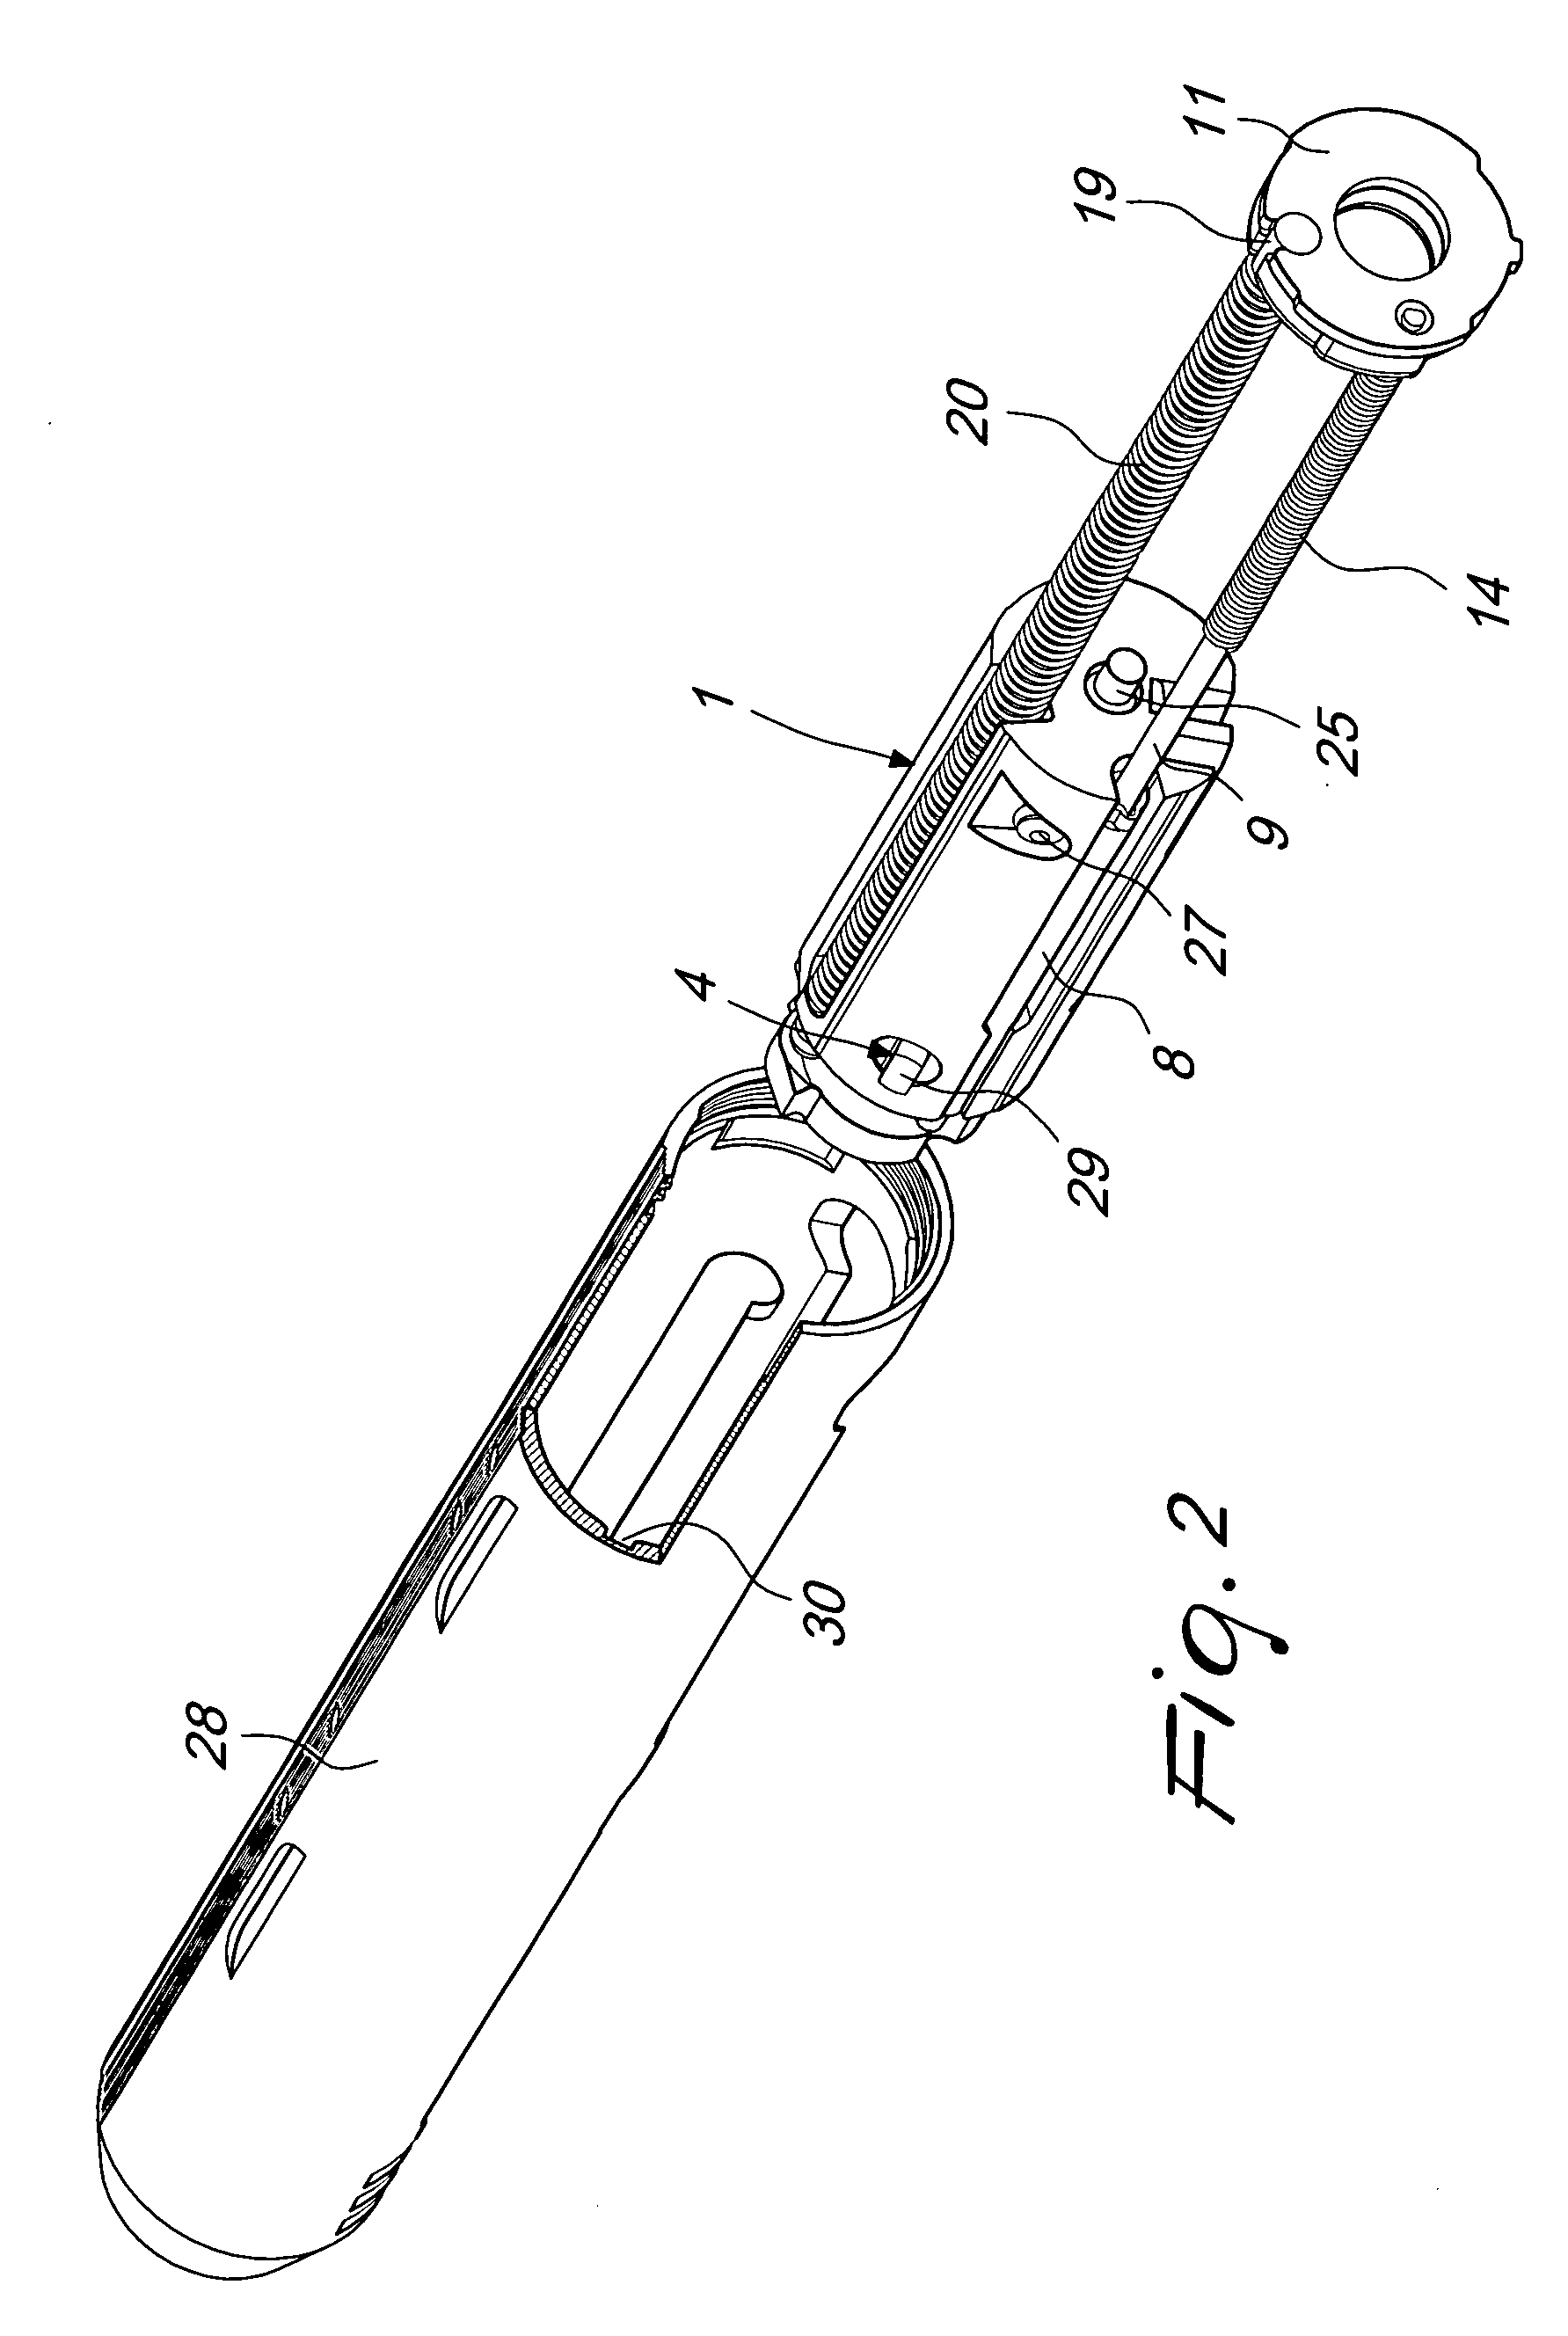 Locking and recocking assembly with swivel breech-lock and rotating locking head, particularly for inertially-actuated weapons using the kinetic energy of recoil